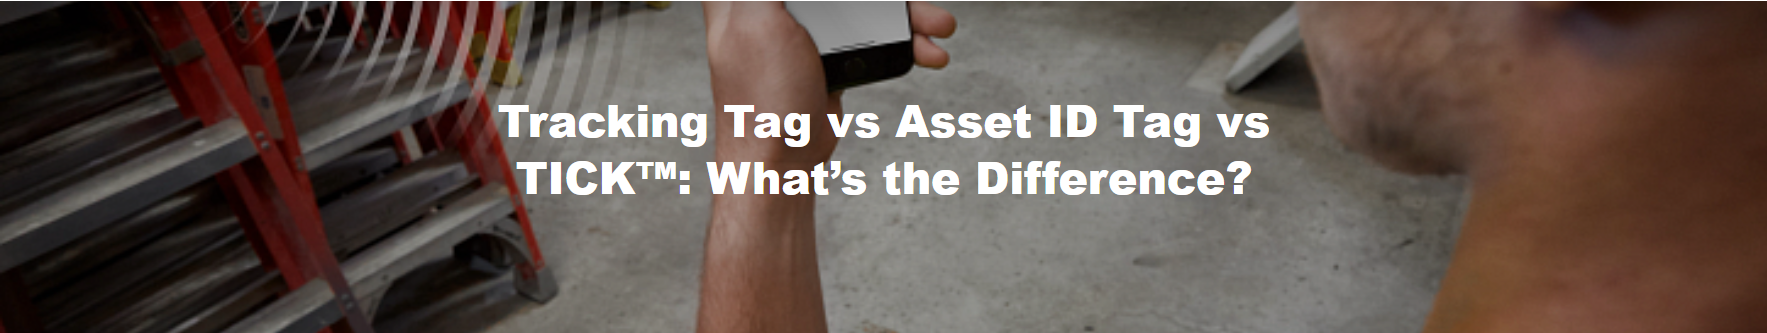 Tracking Tag vs Asset ID Tag vs TICK™: What’s the Difference?